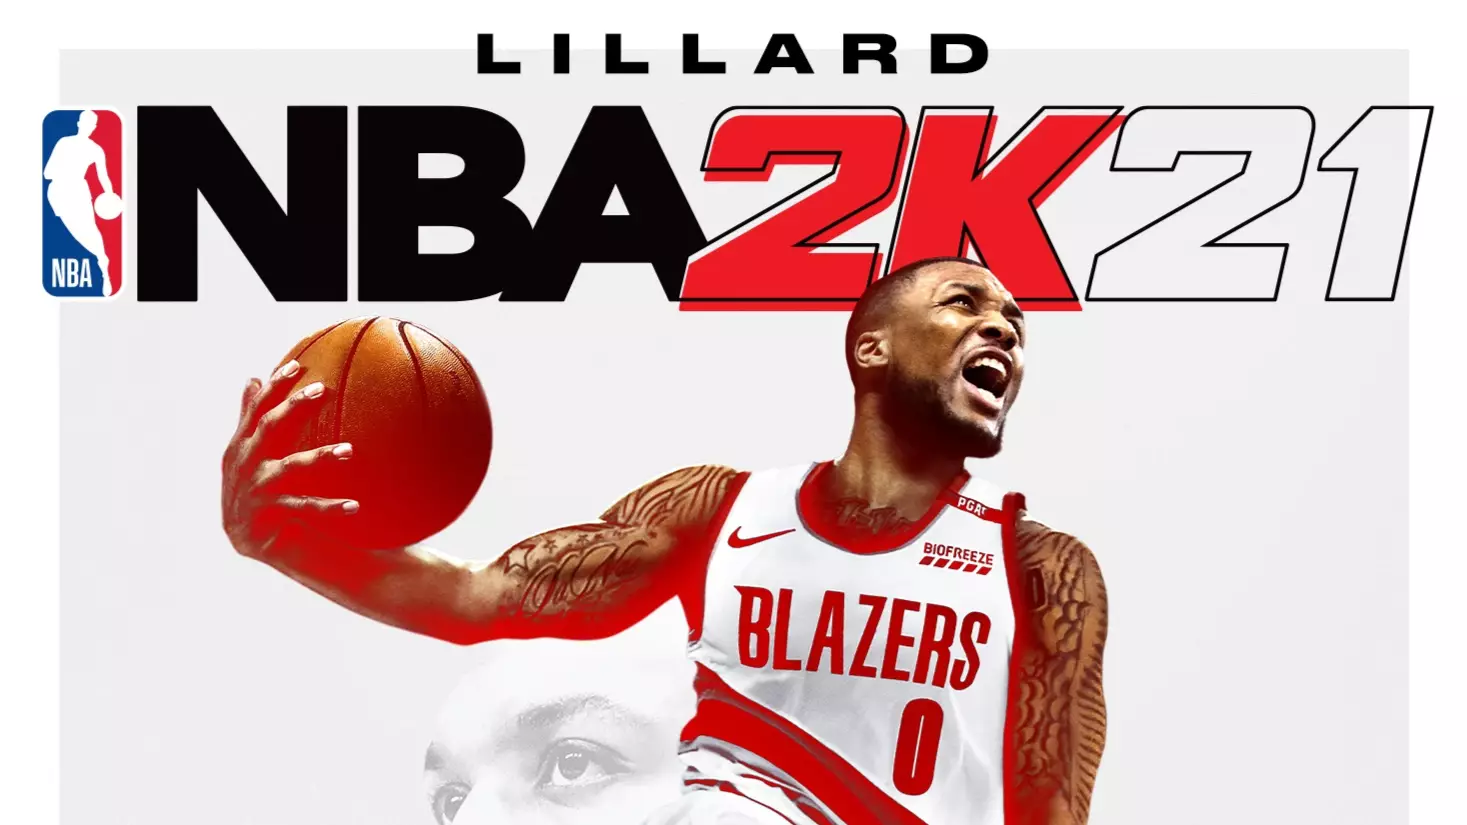 The Highly-Anticipated NBA 2K21 Video Game Is Now Available In Australia And New Zealand